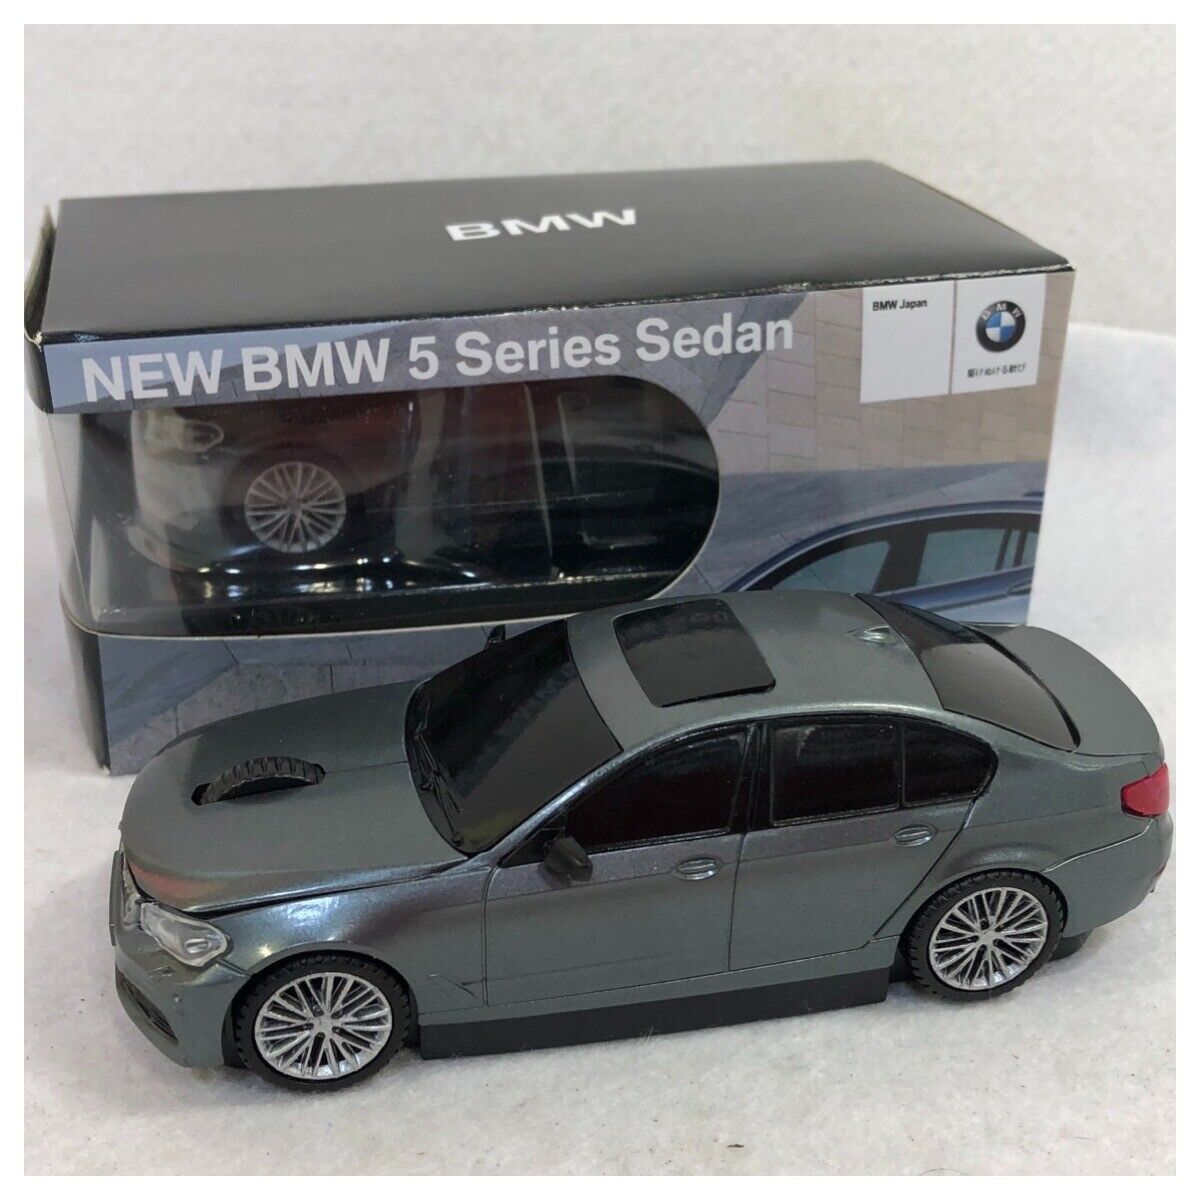 BMW 5 Series Sedan Gray Wireless Mouse - Rare Dealer Exclusive Not for Sale NEW